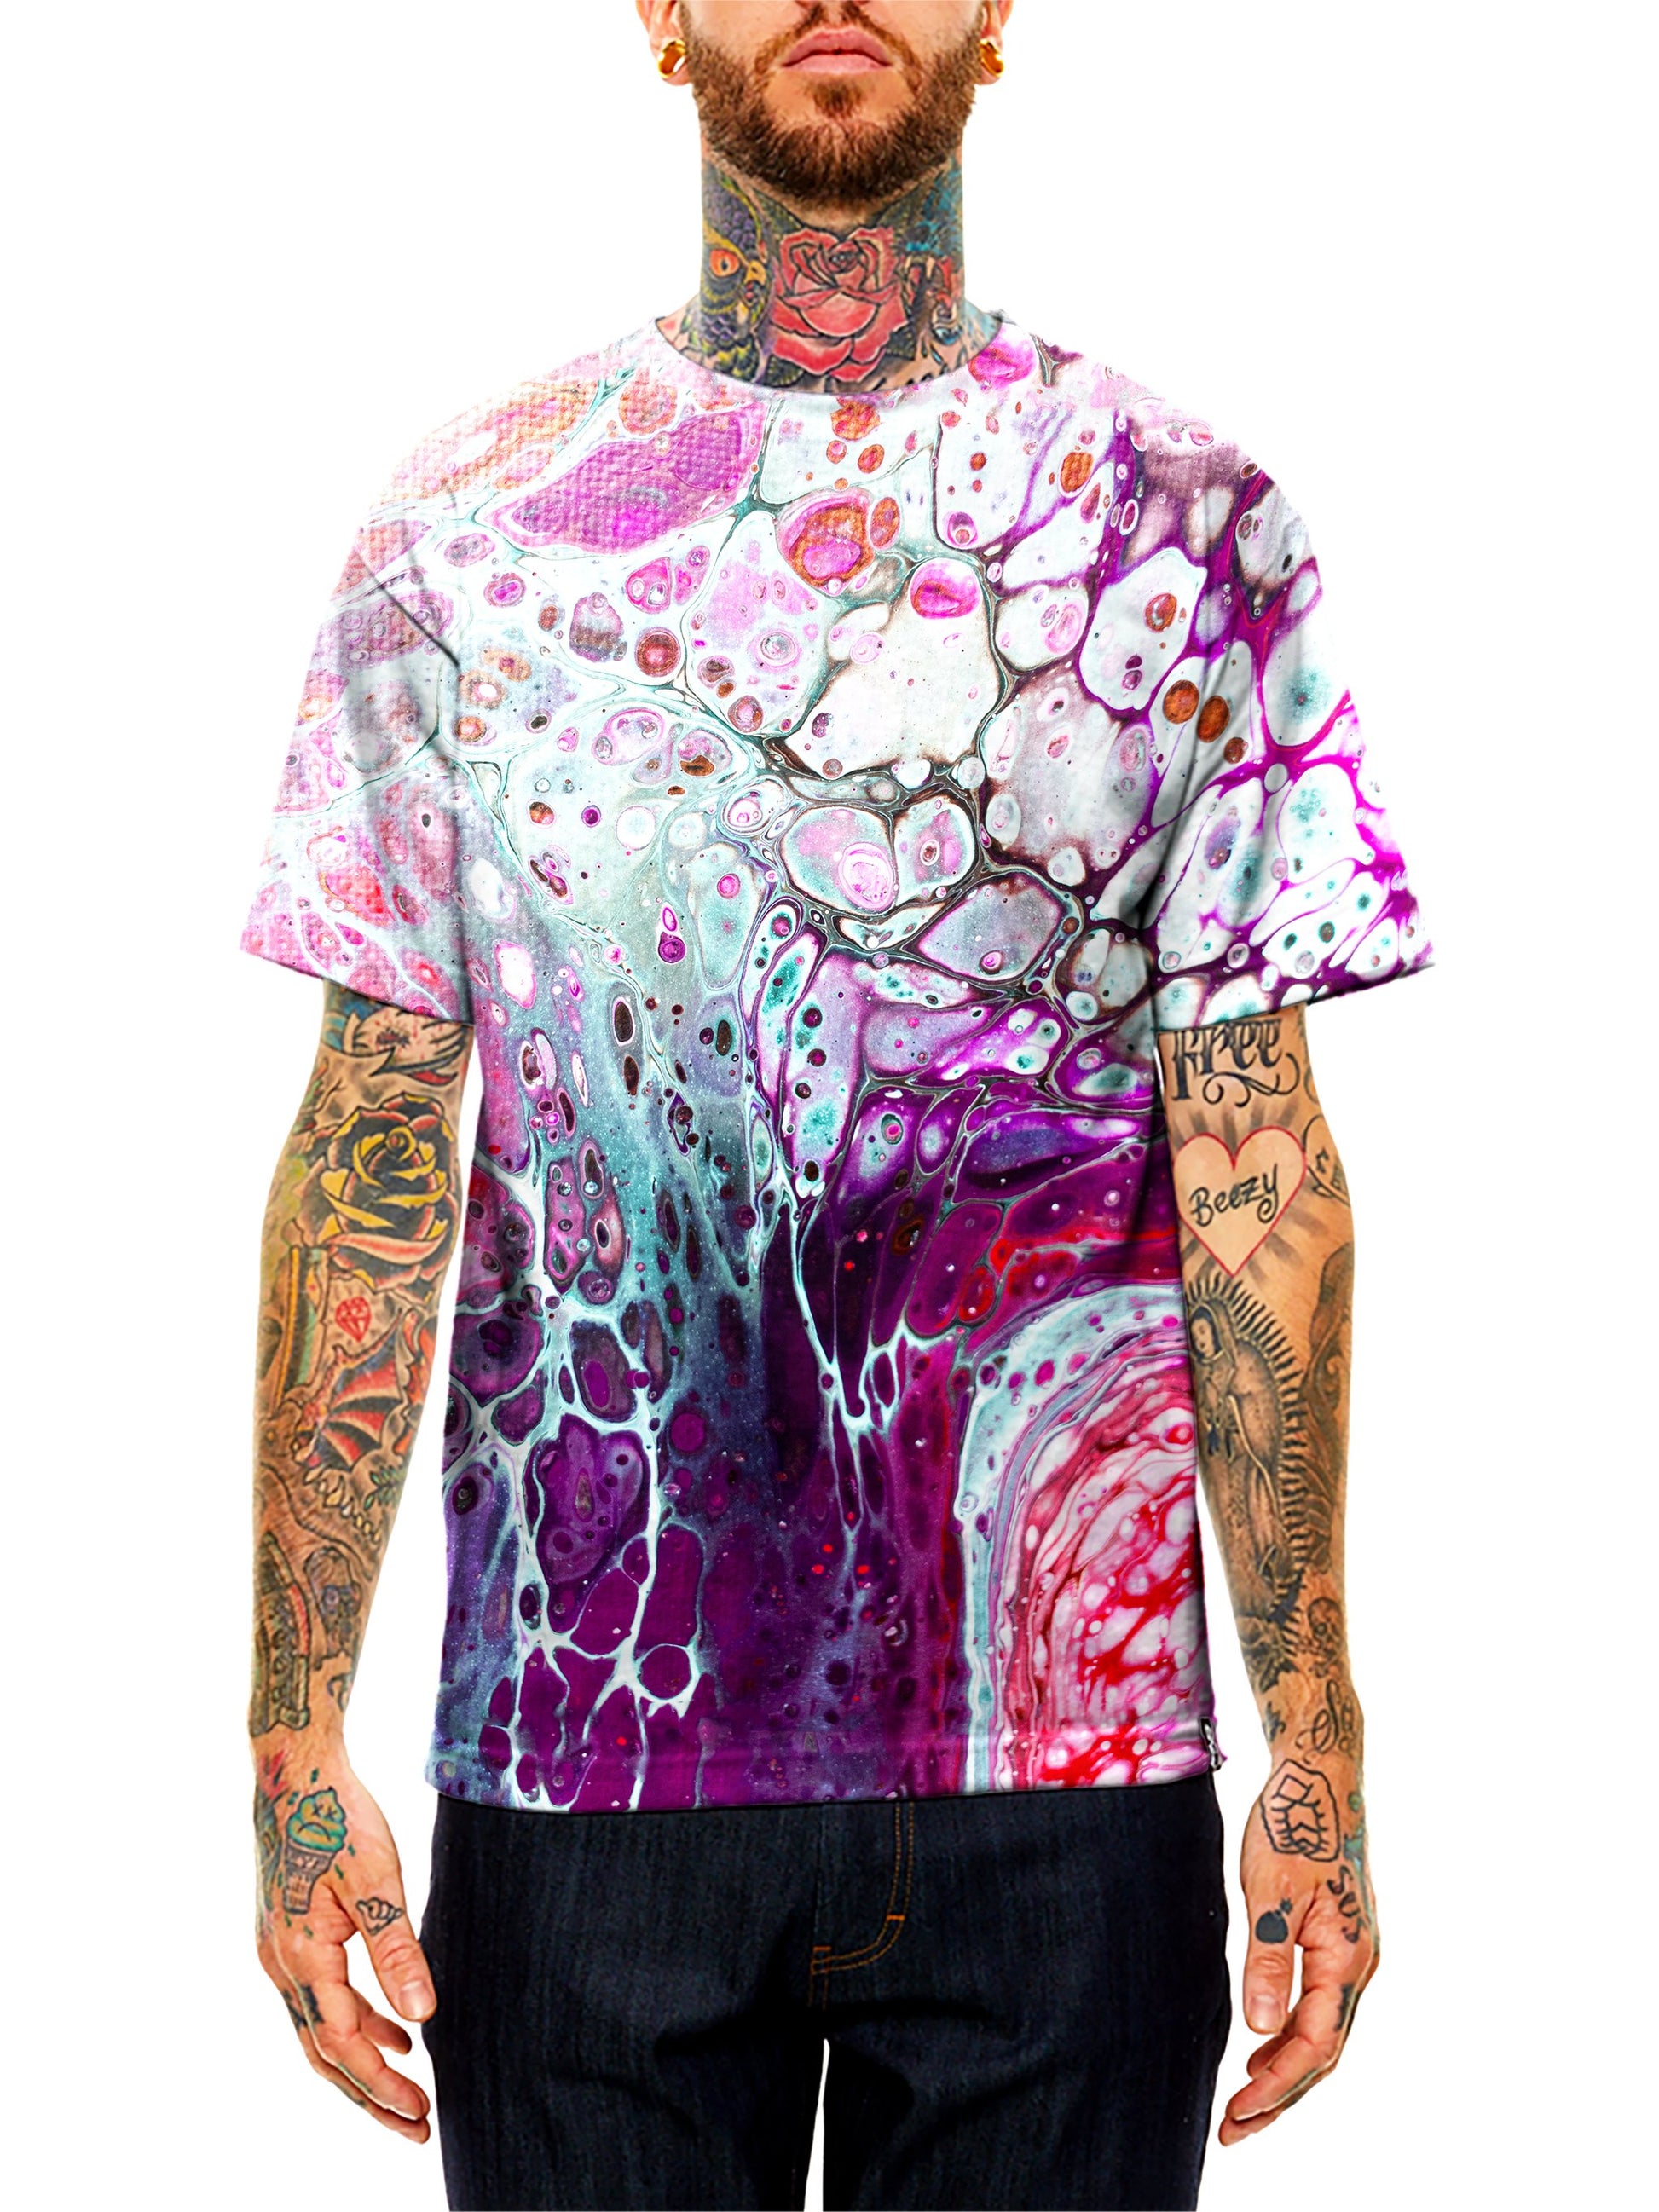 Model wearing GratefullyDyed Apparel pink, purple & blue marbled paint unisex t-shirt.